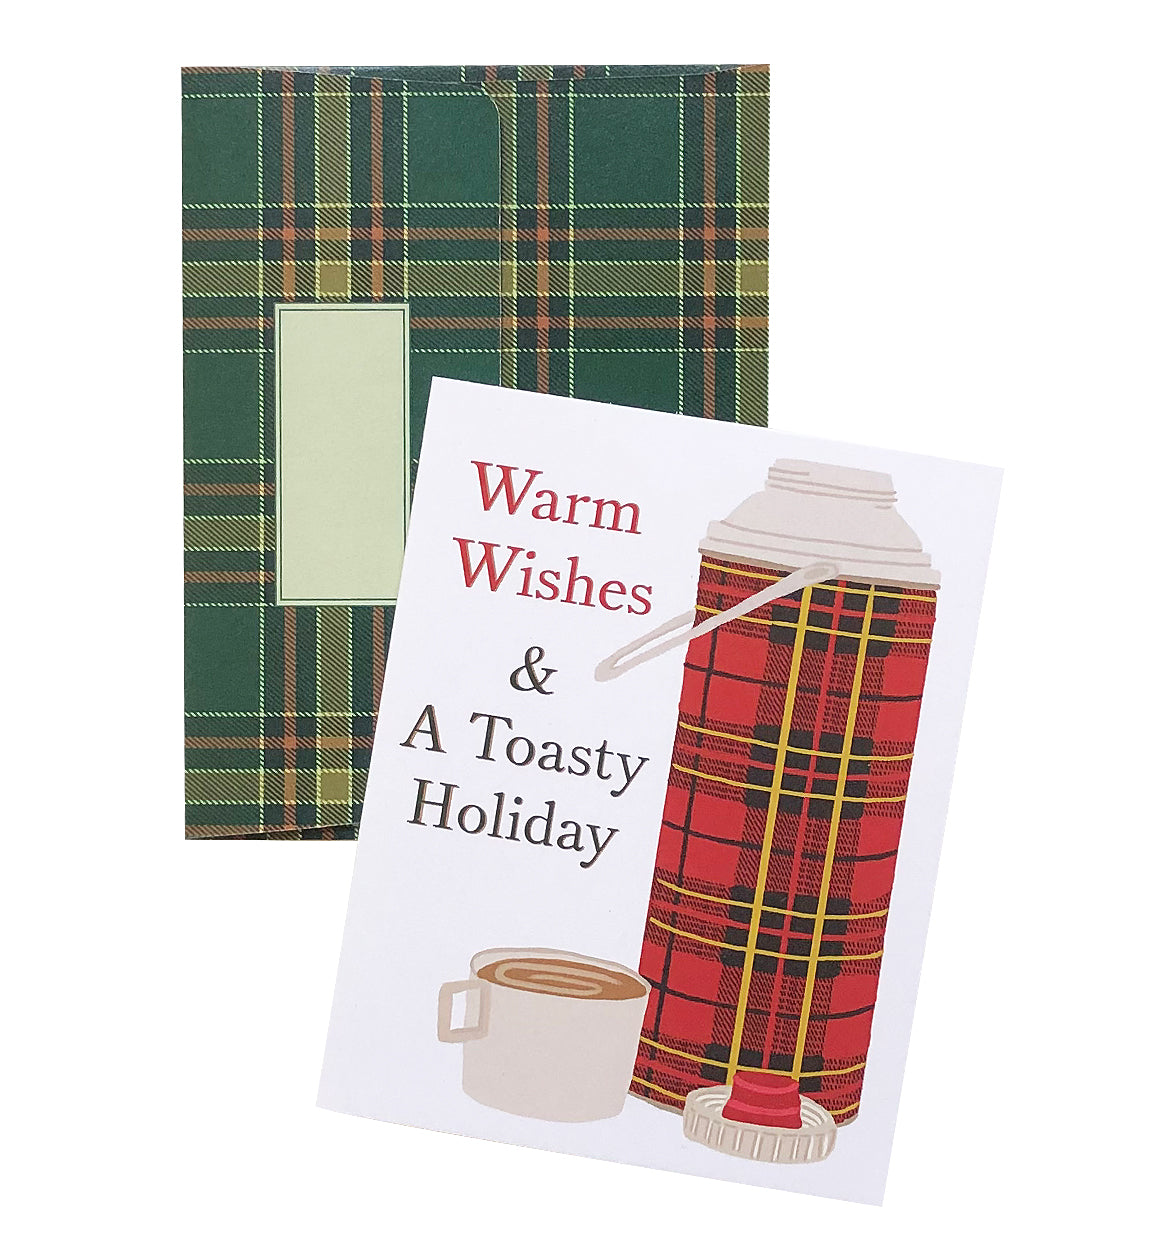 Warm Wishes & A Toasty Holiday